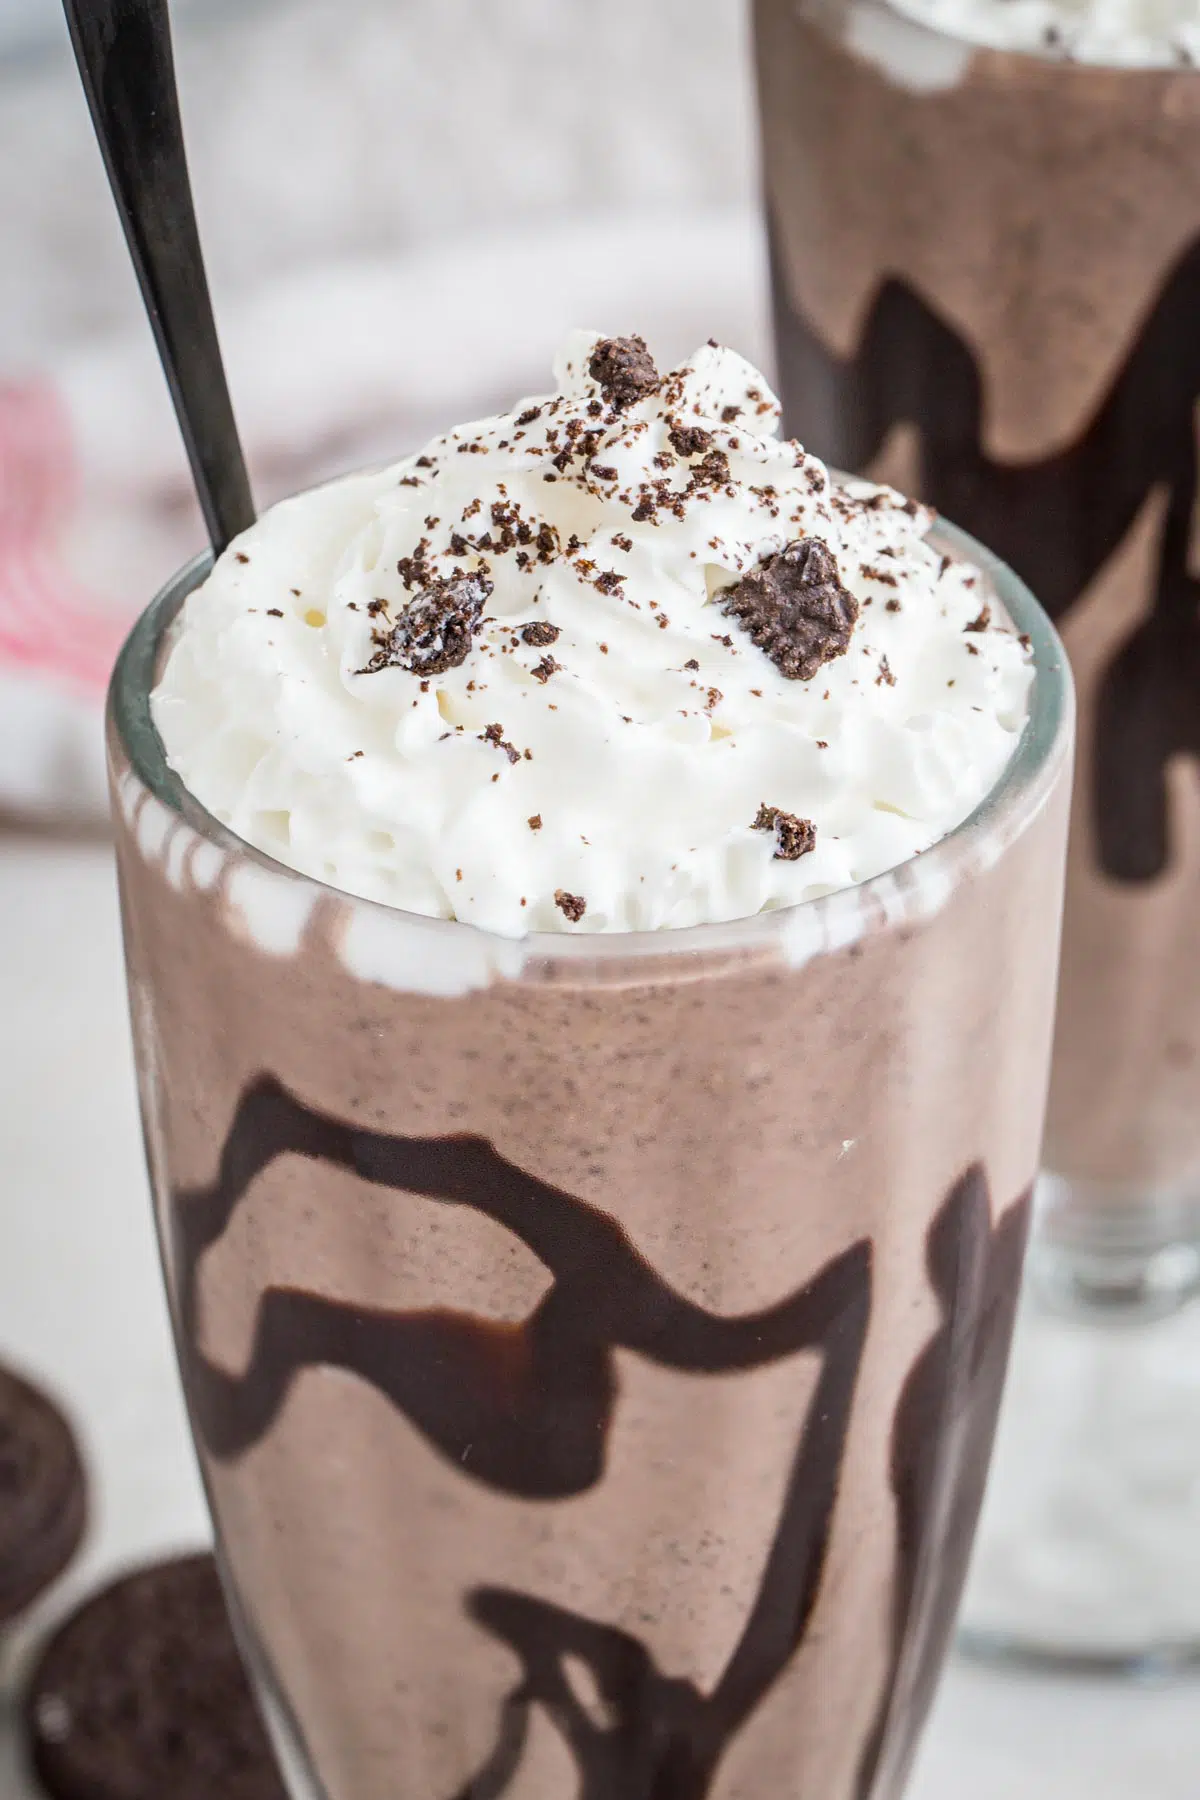 Oreos crumbled on top of whipped topping on top of a milkshake.